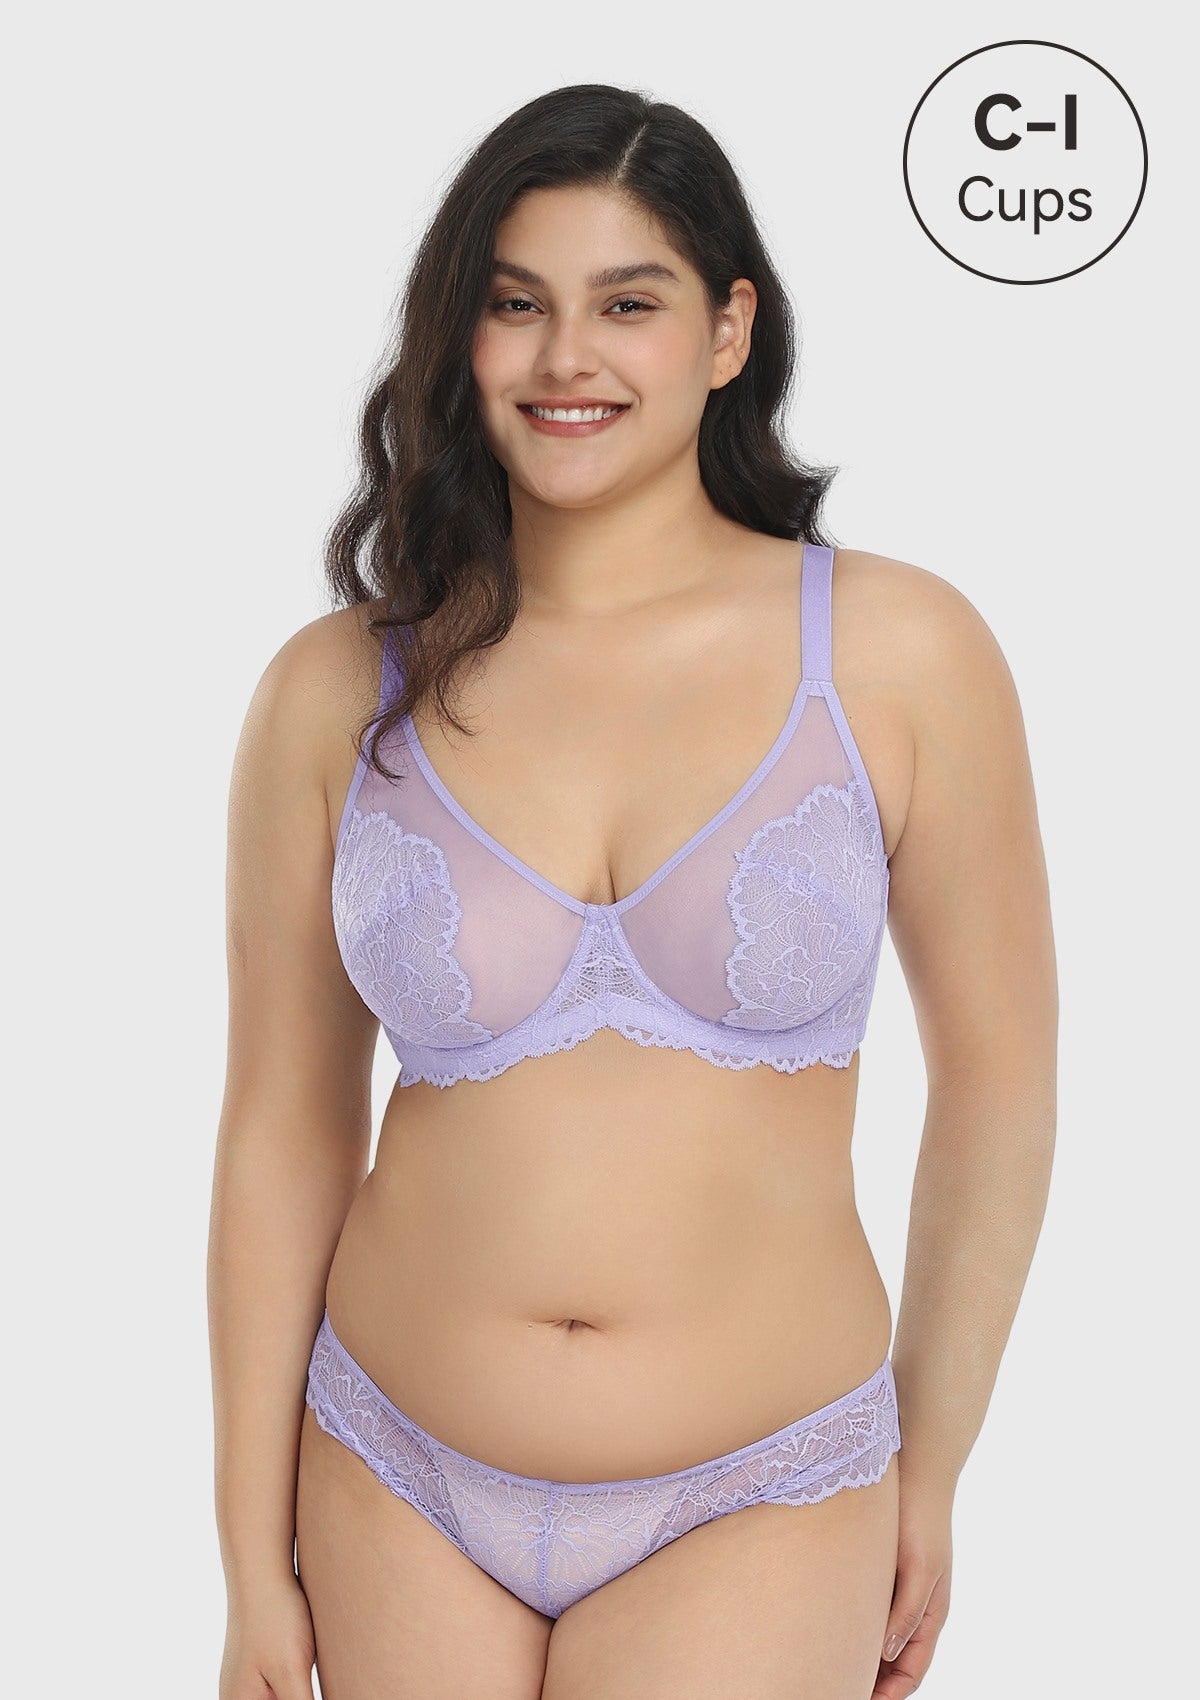 HSIA Blossom Transparent Lace Bra: Plus Size Wired Back Smoothing Bra - Light Purple / 44 / DD/E